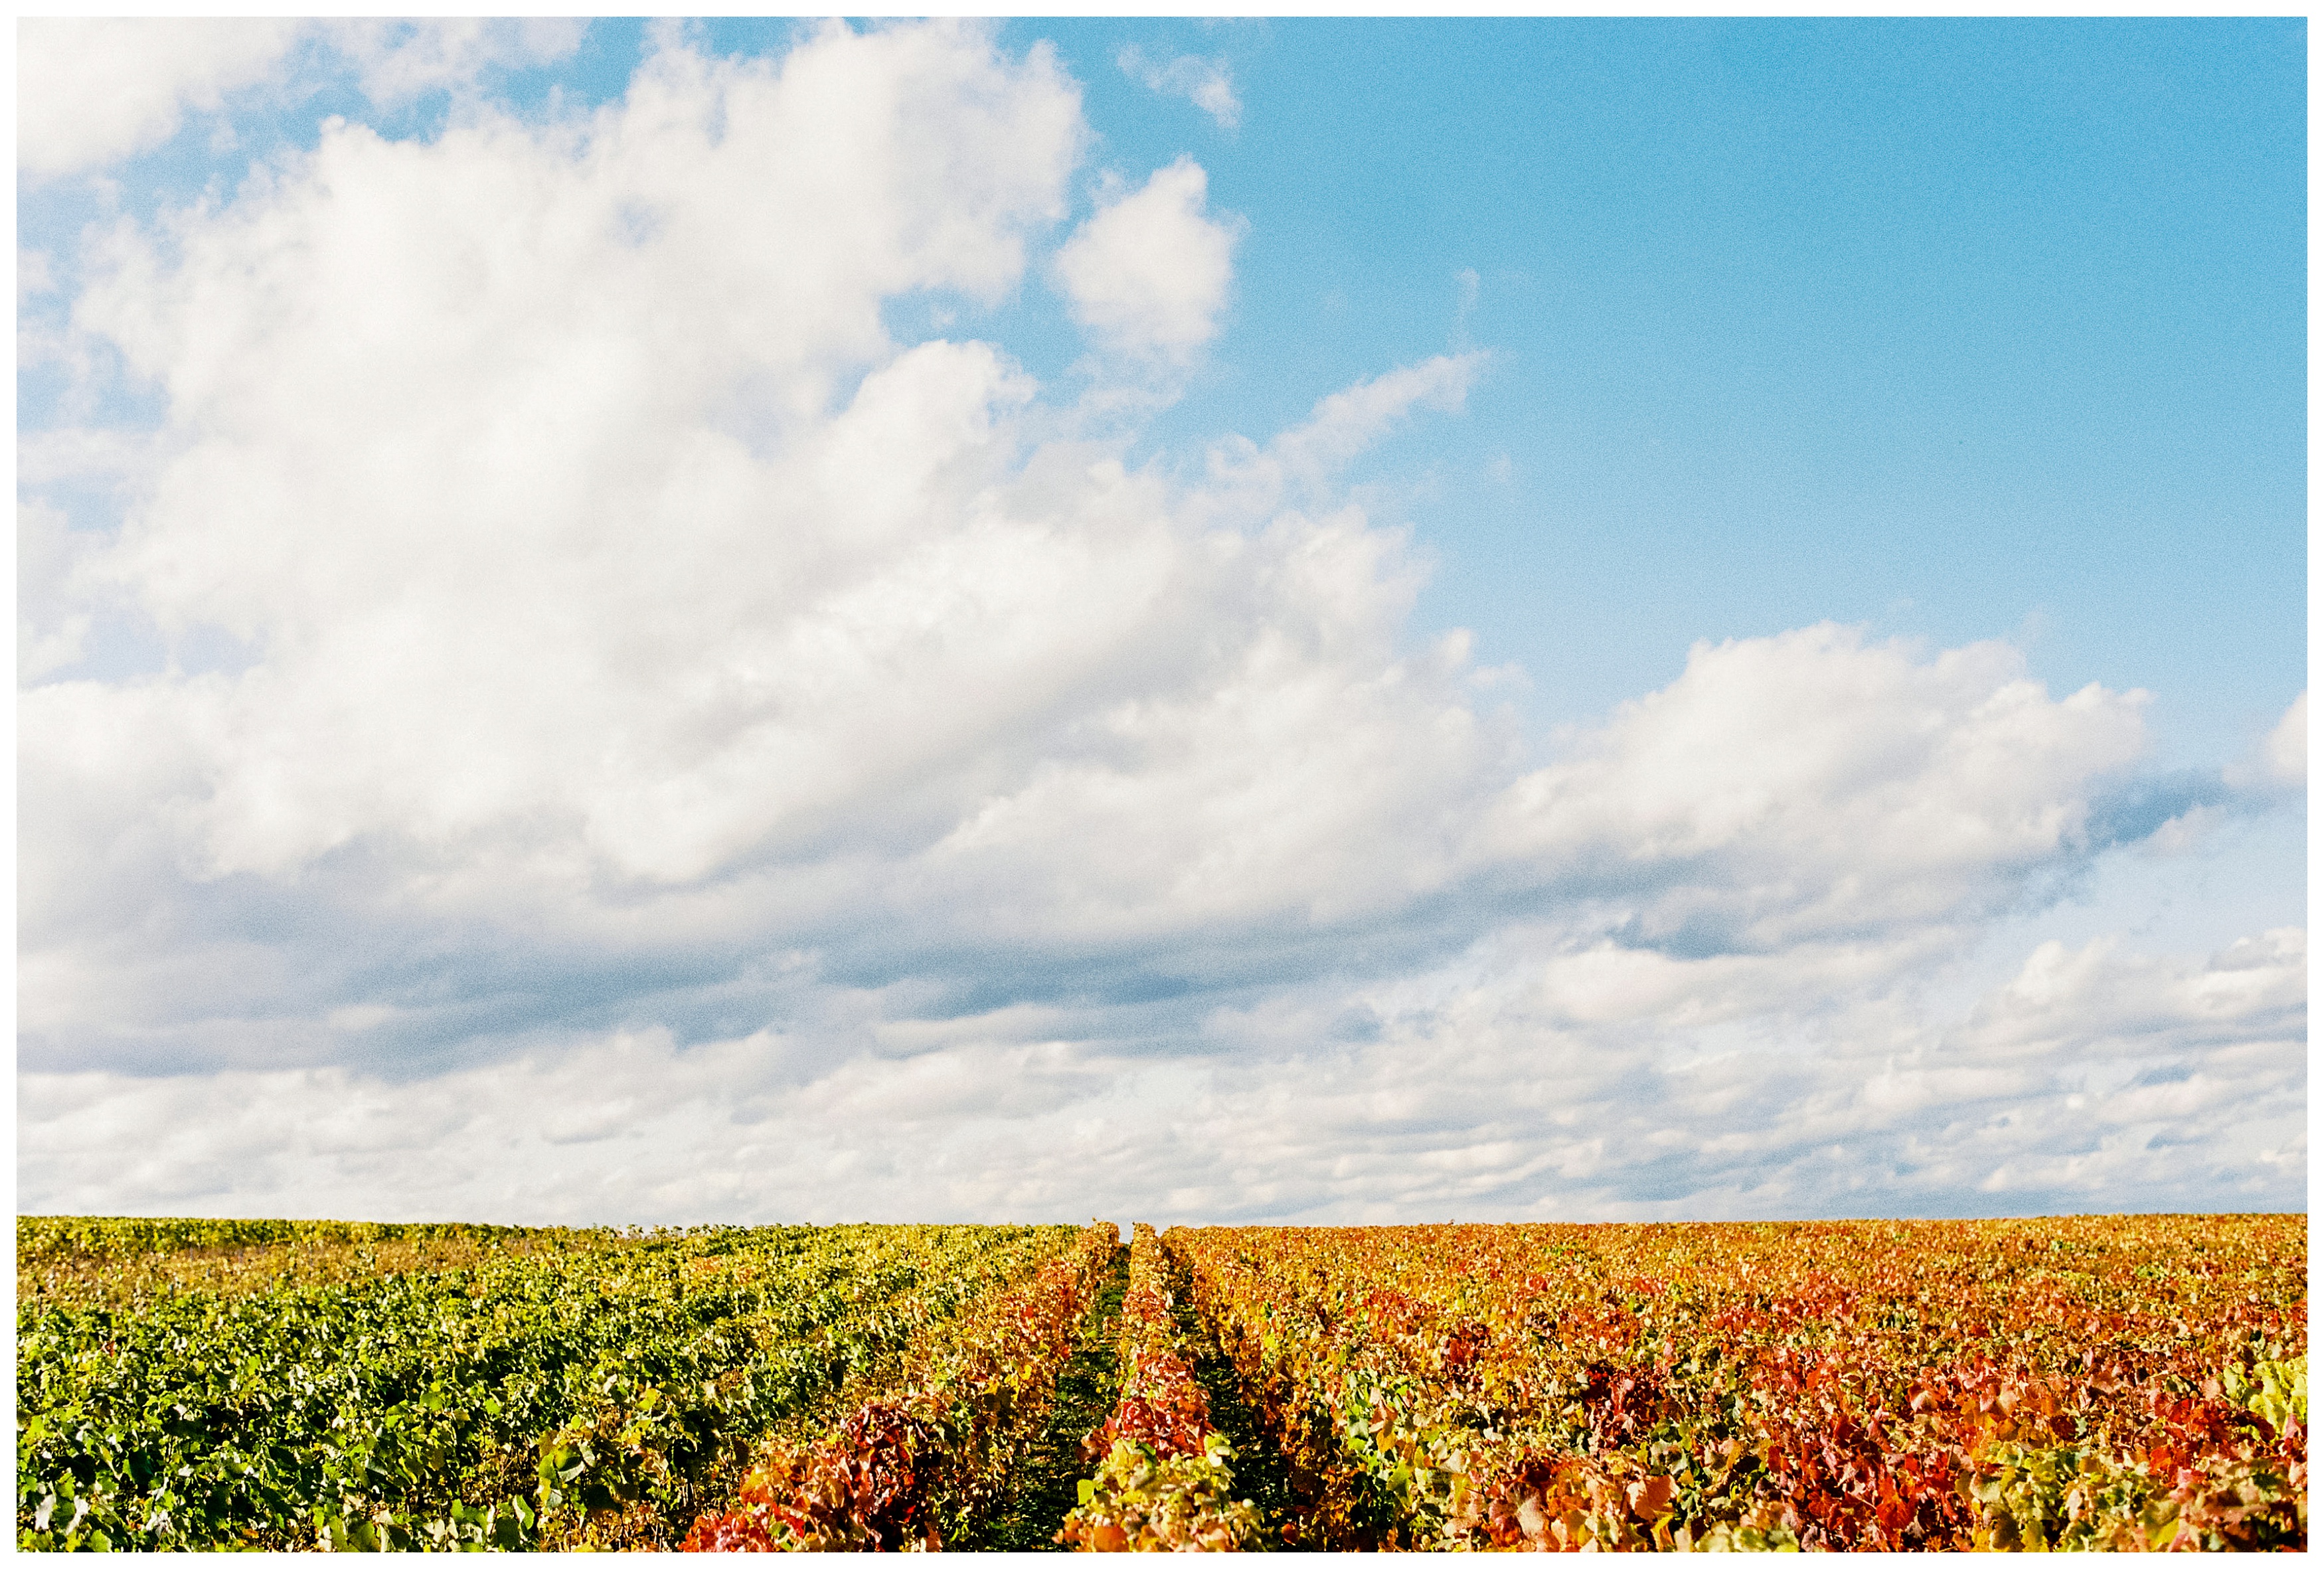 orange, green, and red leaves in a vineyard in reims, france in the champagne region